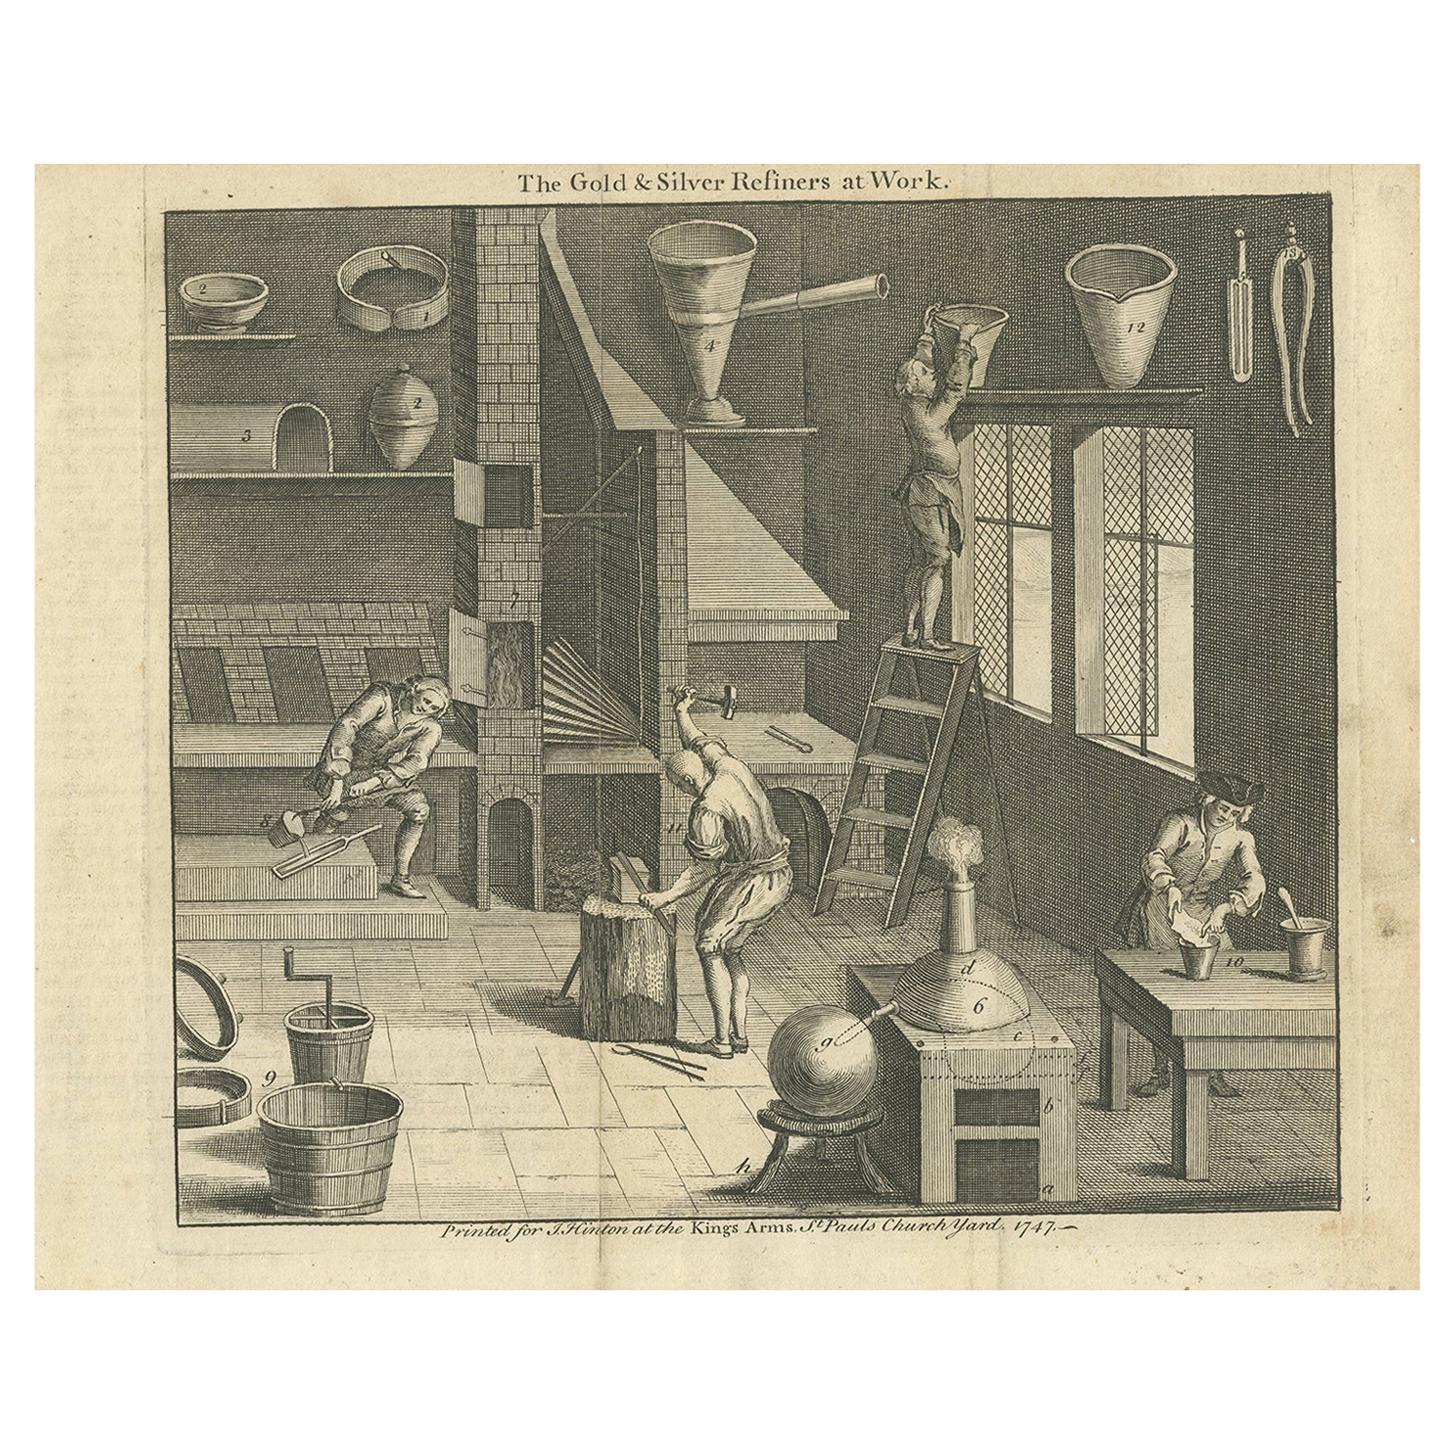 Antique Print of Gold and Silver Refiners at Work by Hinton, 1747